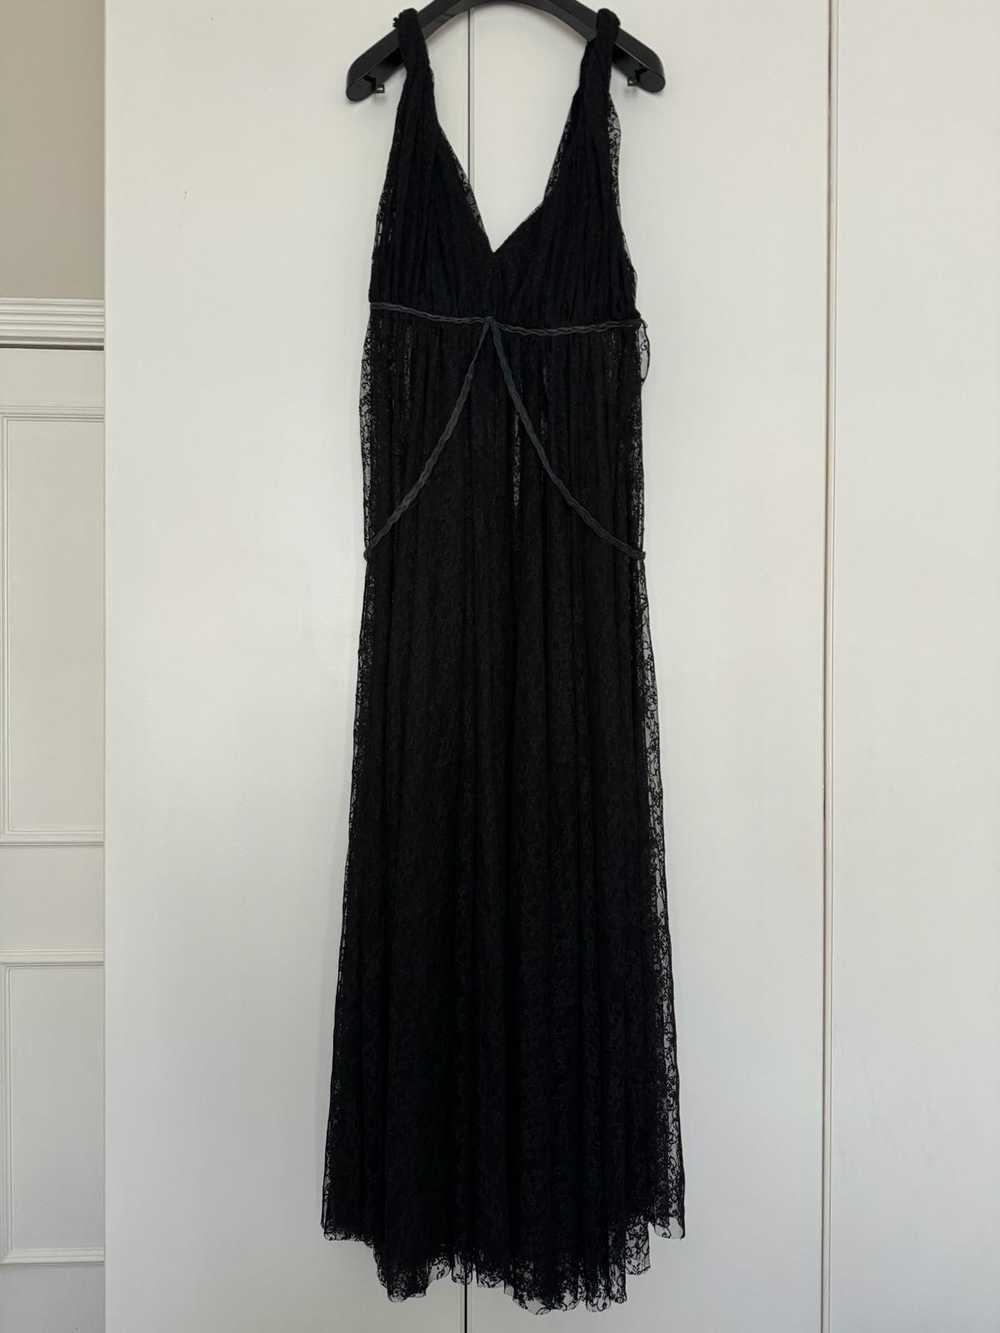 Product Details Black Sheer Lace Plunge Gown - image 2